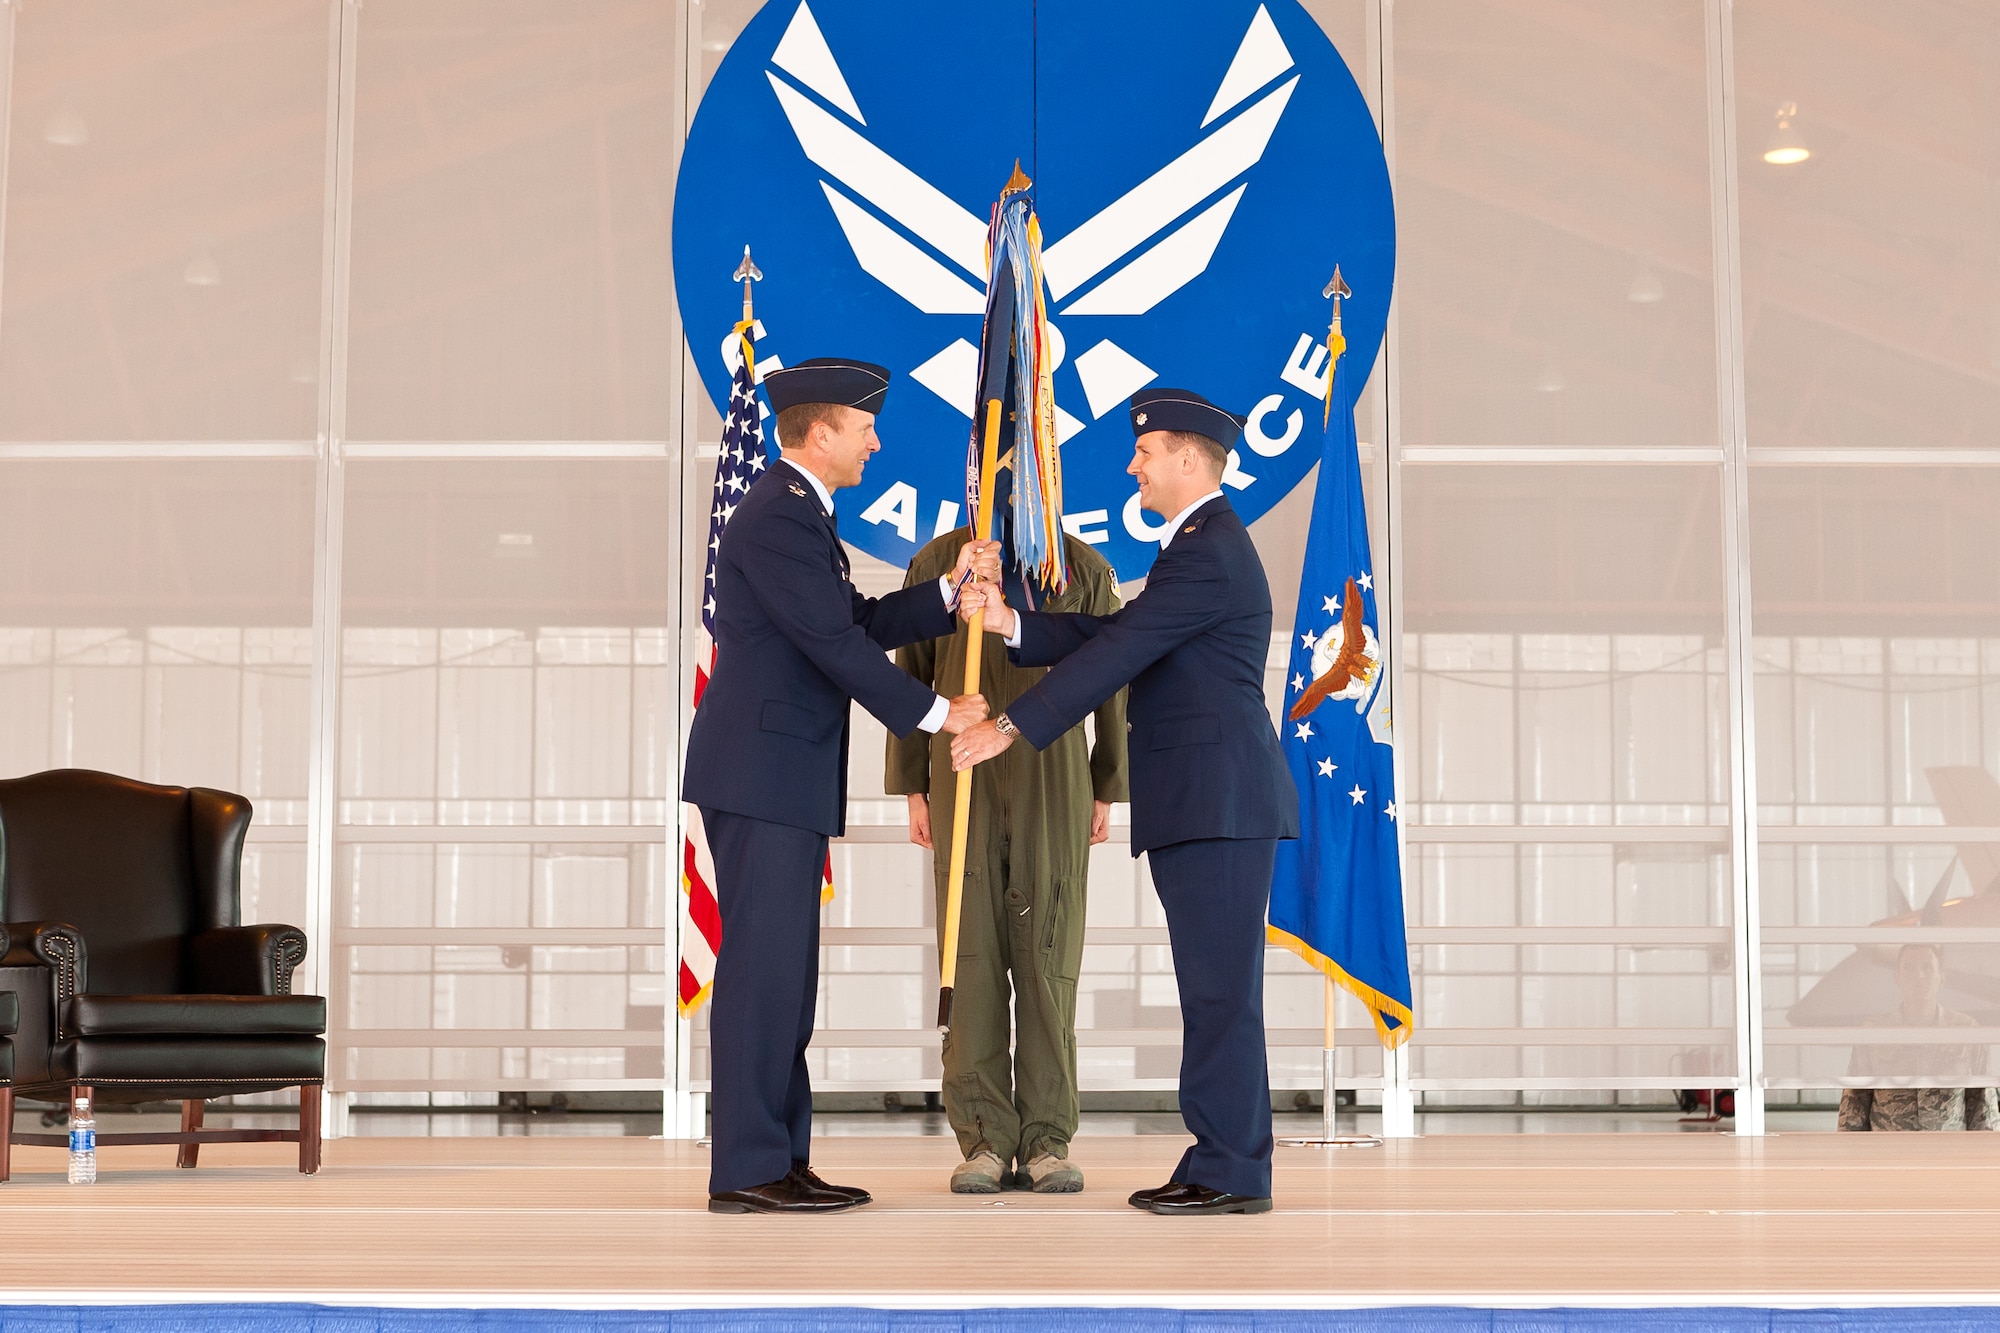 Colonel Kenneth Johnson, 49th Operations Group commander, hands the 9th Attack Squadron’s guidon to Lt. Col. Jeffrey Patton, 9th Attack Squadron commander at Holloman Air Force Base, N.M., Sept. 28. The exchanging of the guidon symbolizes Patton assuming command of the newly-activated 9th Attack Squadron. The 9th Attack Squadron was activated to supplement the 29th Attack Squadron as a remotely piloted aircraft training squadron. (Courtesy photo)